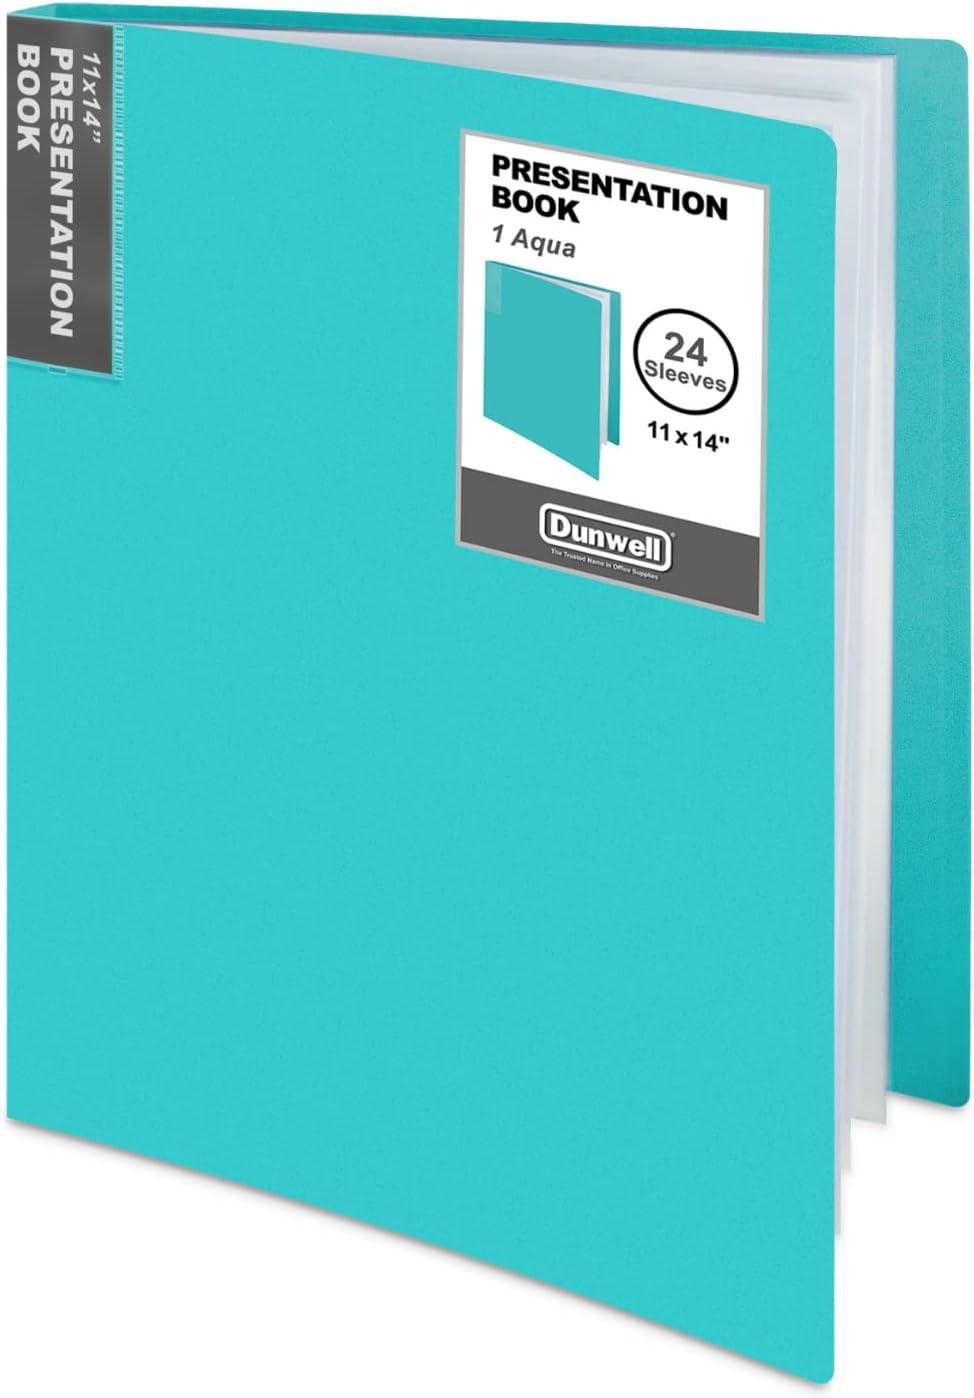 Dunwell 11x14 Binder with Sleeves - (Aqua), 24 Pockets Display 48 Pages,  Large Folder with Plastic Sleeves, 11 x 14 Presentation Book with Protector  Sleeves, Kids Art Portfolio 14x11, Clear Pages Vertical Aqua